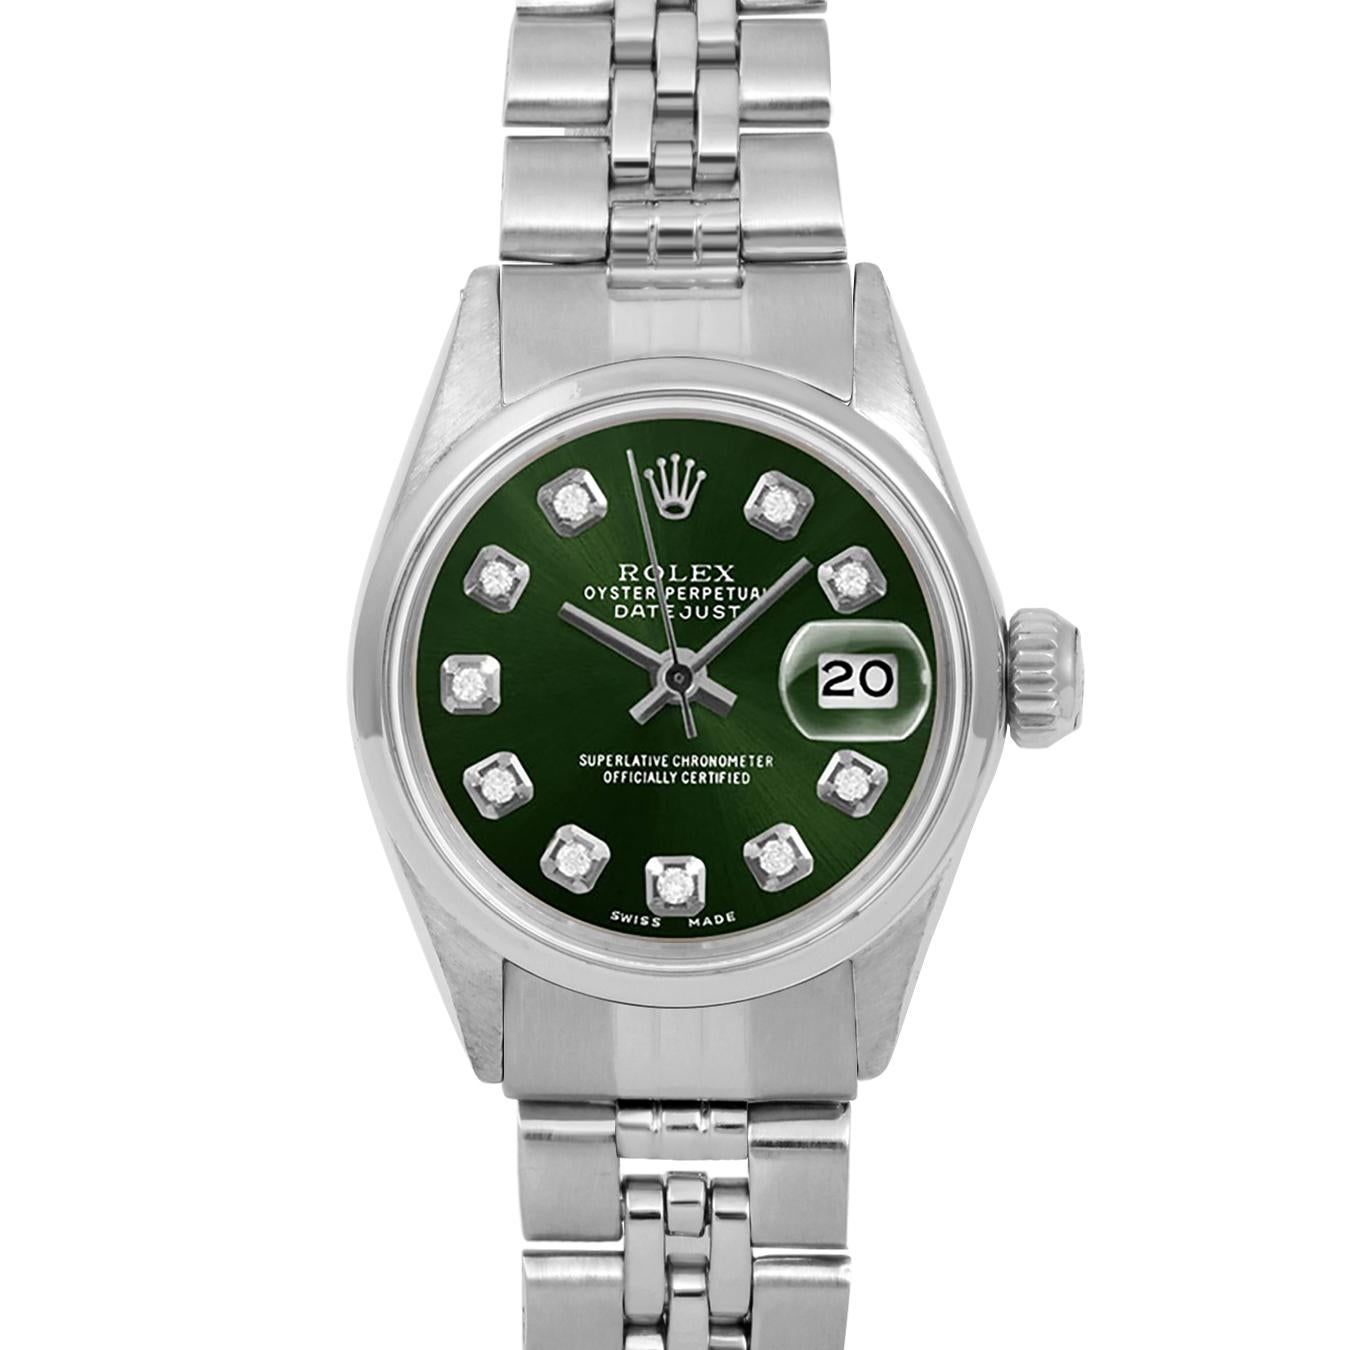 Brand : Rolex
Model : Datejust (Non-Quickset Model)
Gender : Ladies
Metals : Stainless Steel
Case Size : 24 mm

Dial : Custom Green Diamond Dial (This dial is not original Rolex And has been added aftermarket yet is a beautiful Custom